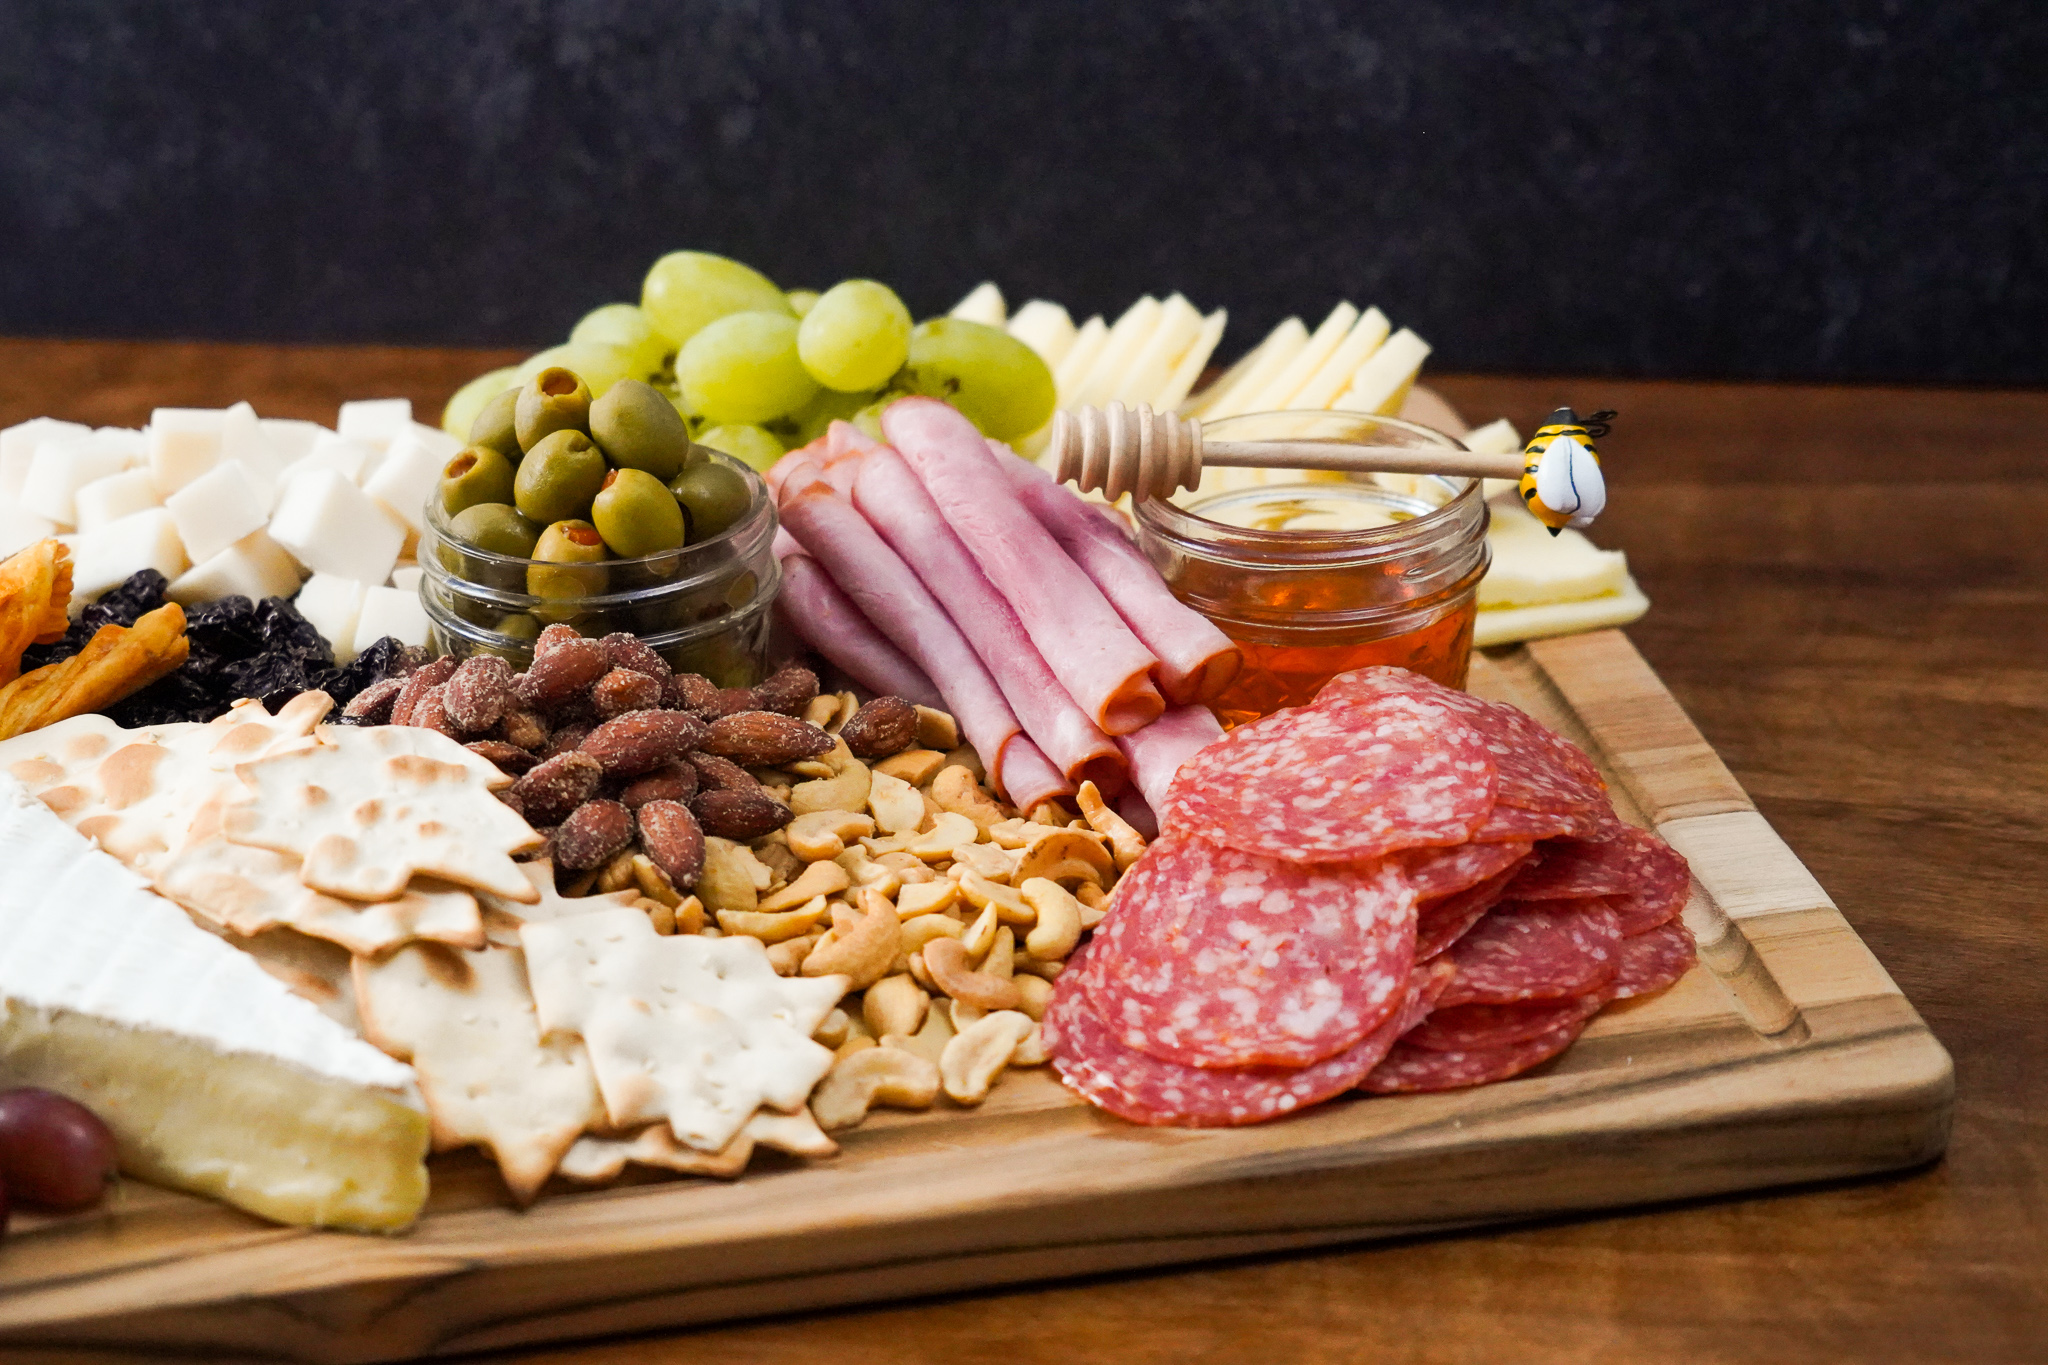 What is charcuterie?